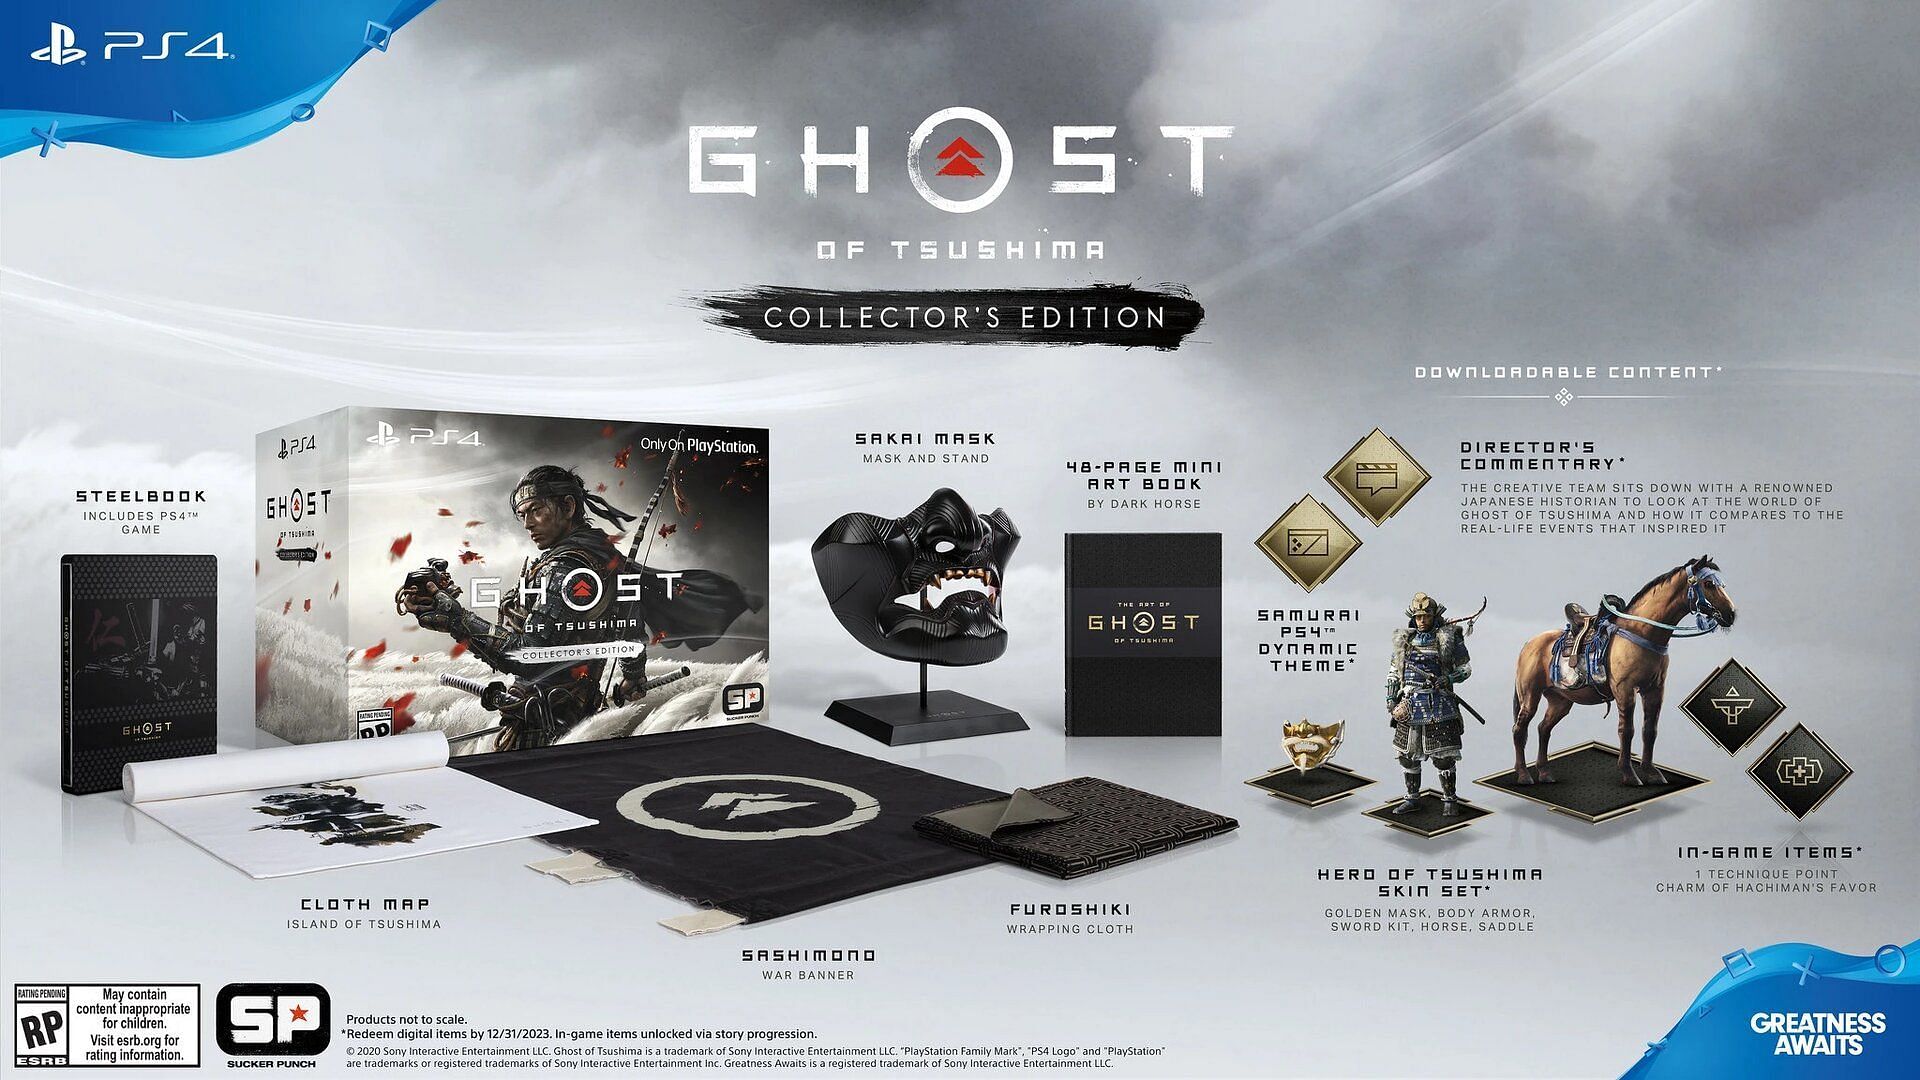 The items included in the Ghost of Tsushima Collector